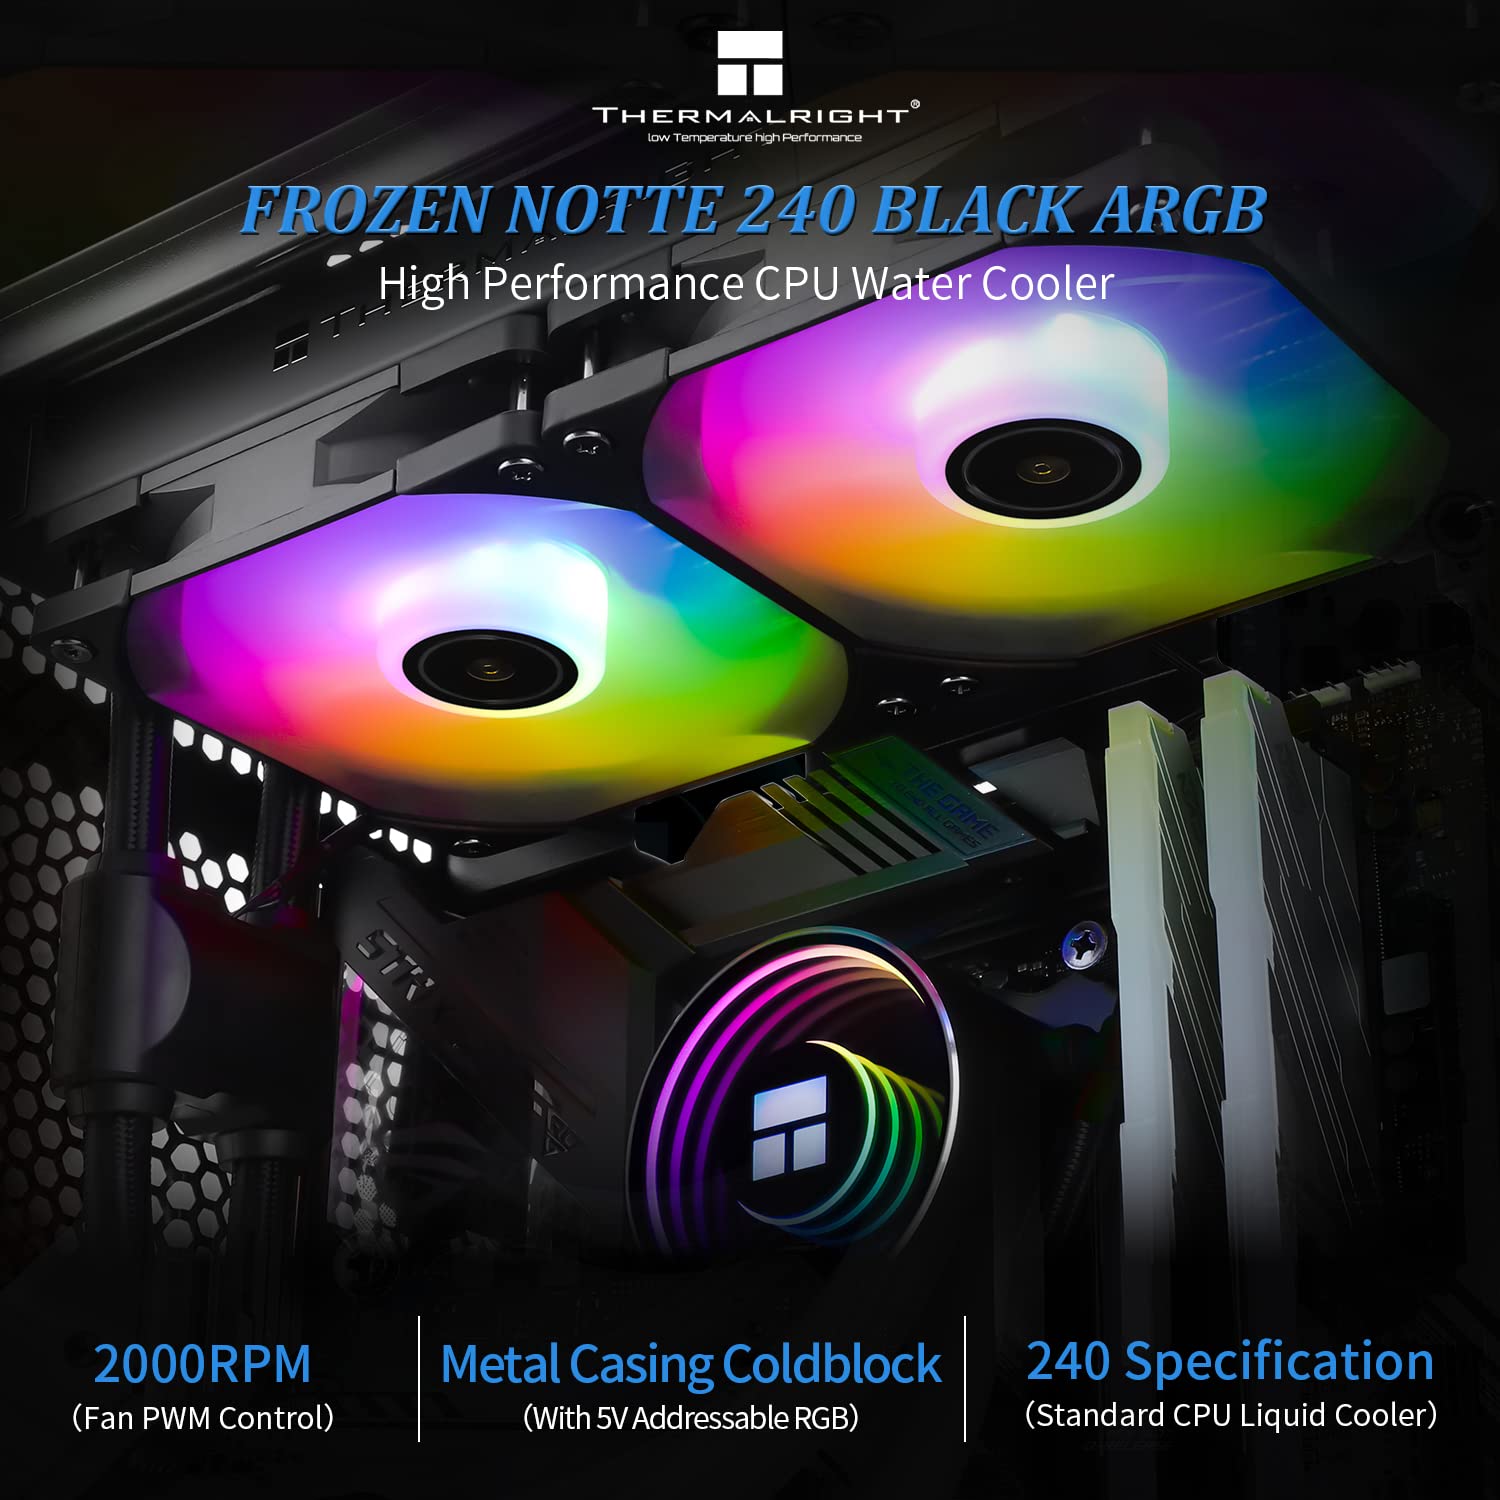 Thermalright Frozen Notte 240 Black ARGB Water Cooling CPU Cooler, 240Black CPU Cooler Specifications, Double PWM Fans, S-FDB V2 Bearings, Suitable for AMD/AM4 AM5,Intel LGA 1700/1150/1151/1200/2011